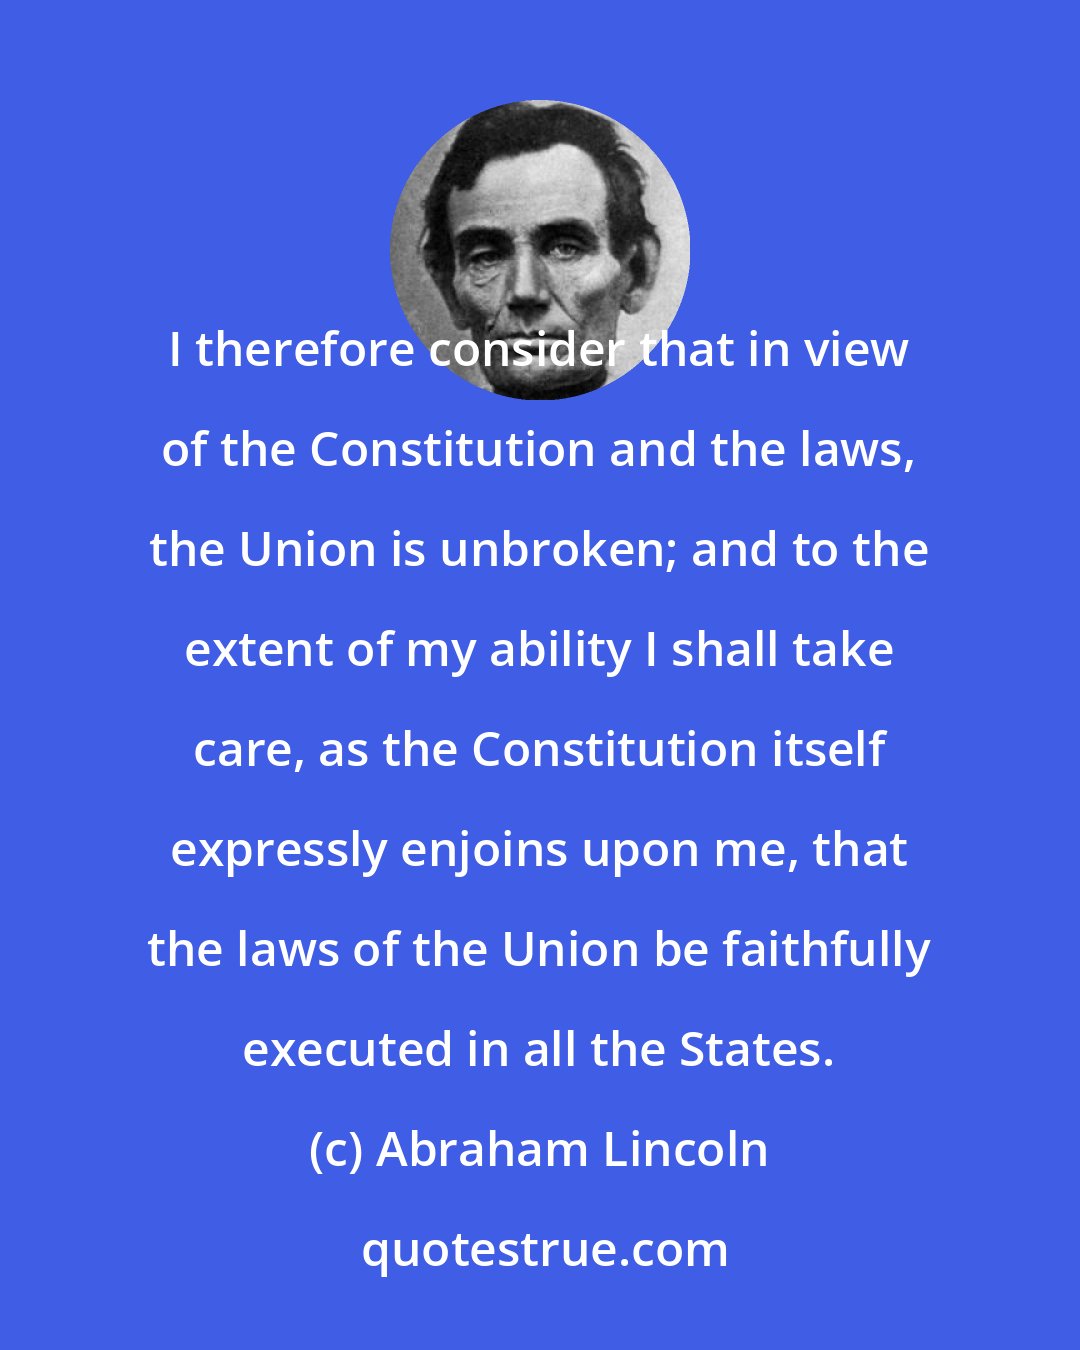 Abraham Lincoln: I therefore consider that in view of the Constitution and the laws, the Union is unbroken; and to the extent of my ability I shall take care, as the Constitution itself expressly enjoins upon me, that the laws of the Union be faithfully executed in all the States.